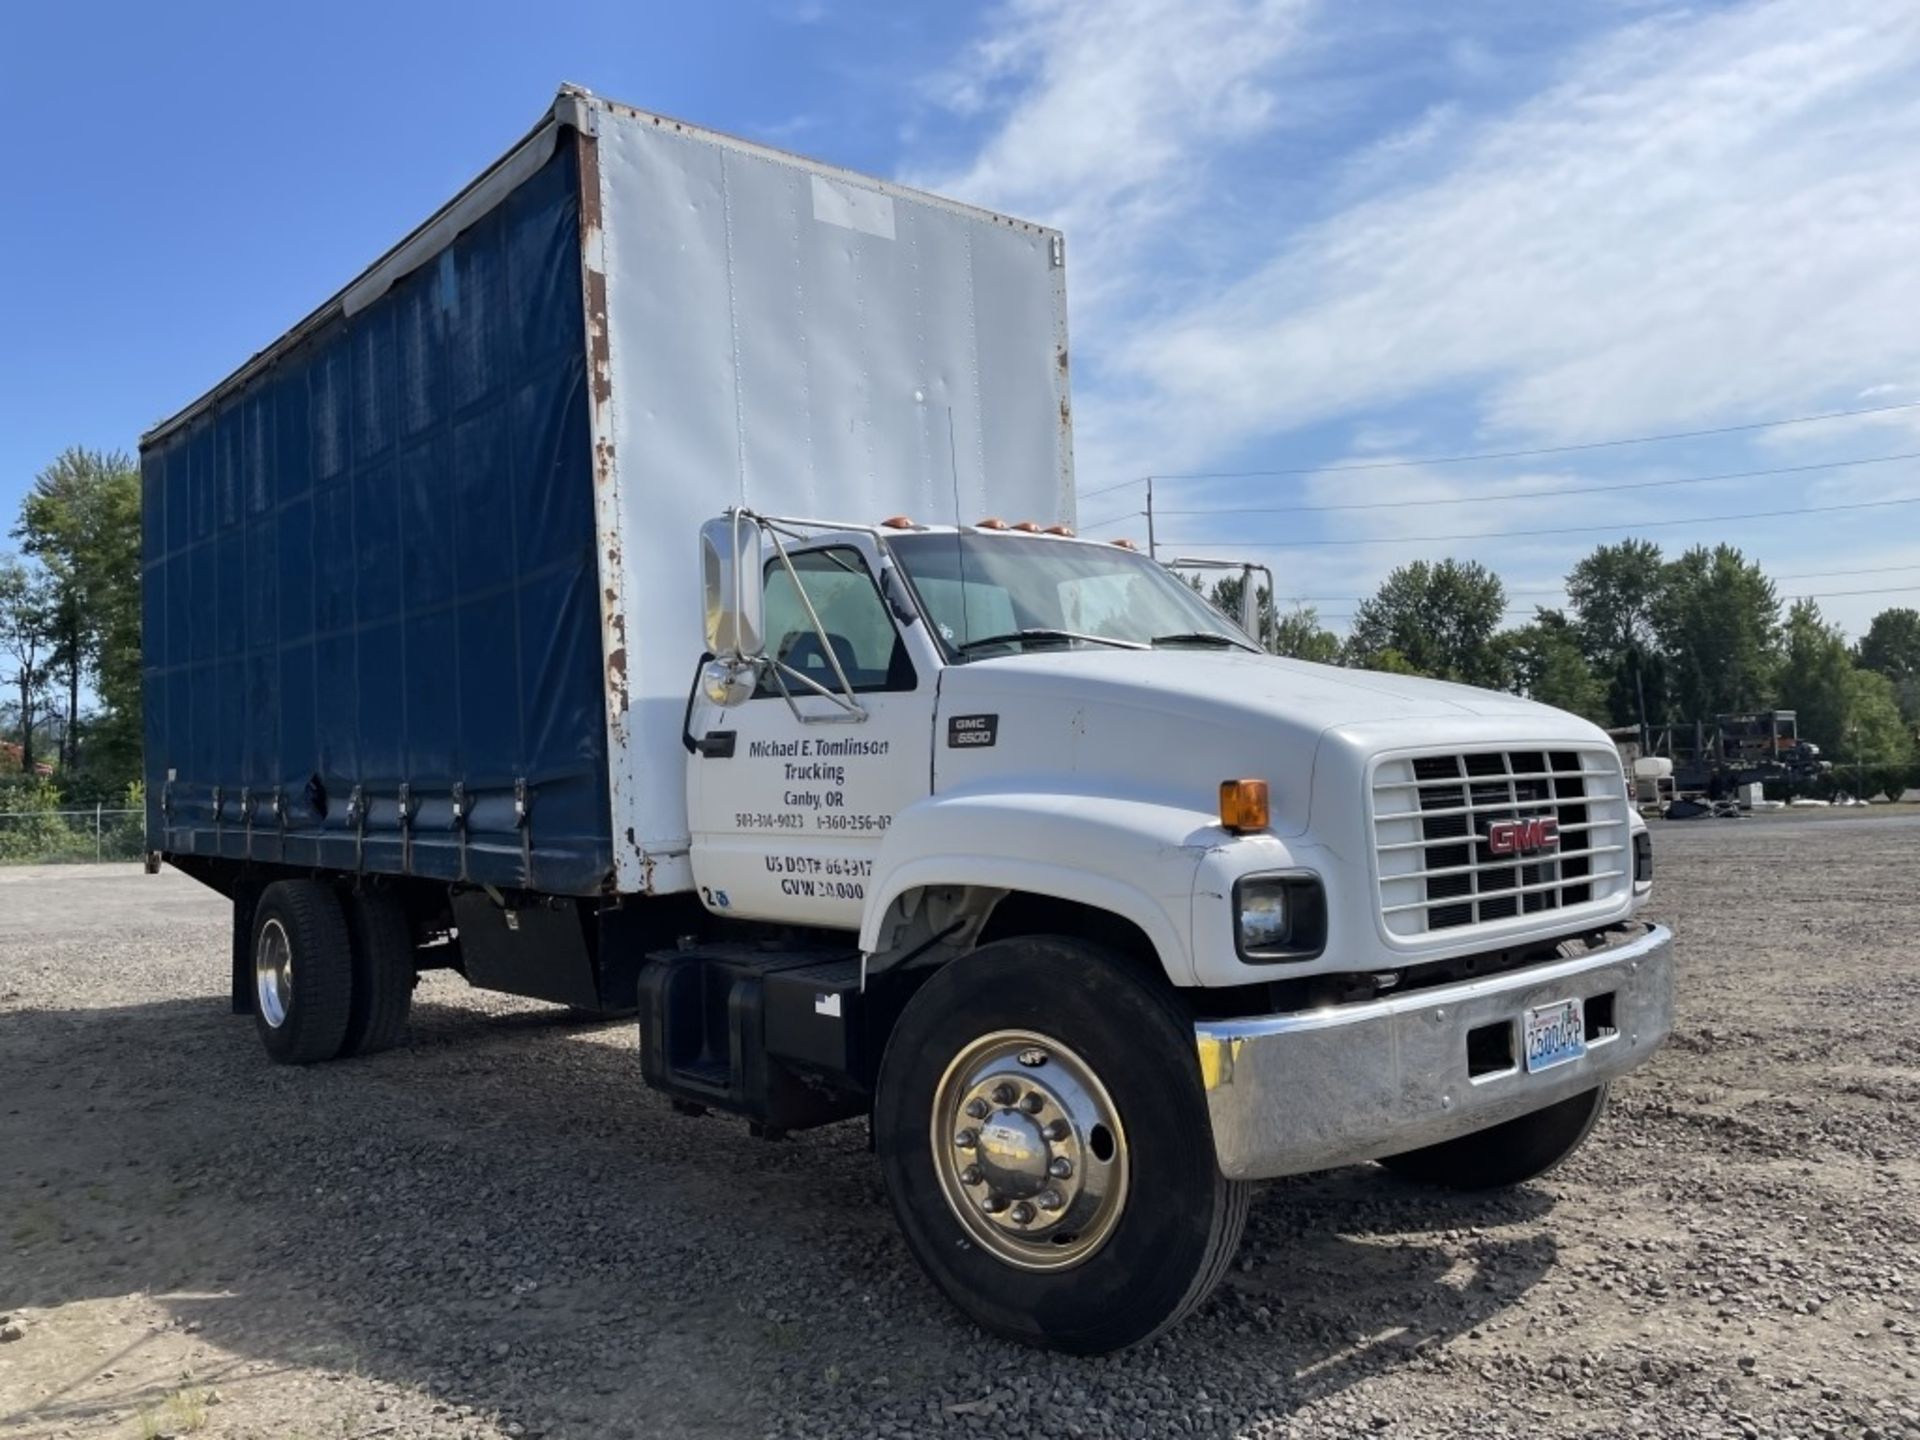 1997 GMC C6500 Curtain Side Box Truck - Image 2 of 18